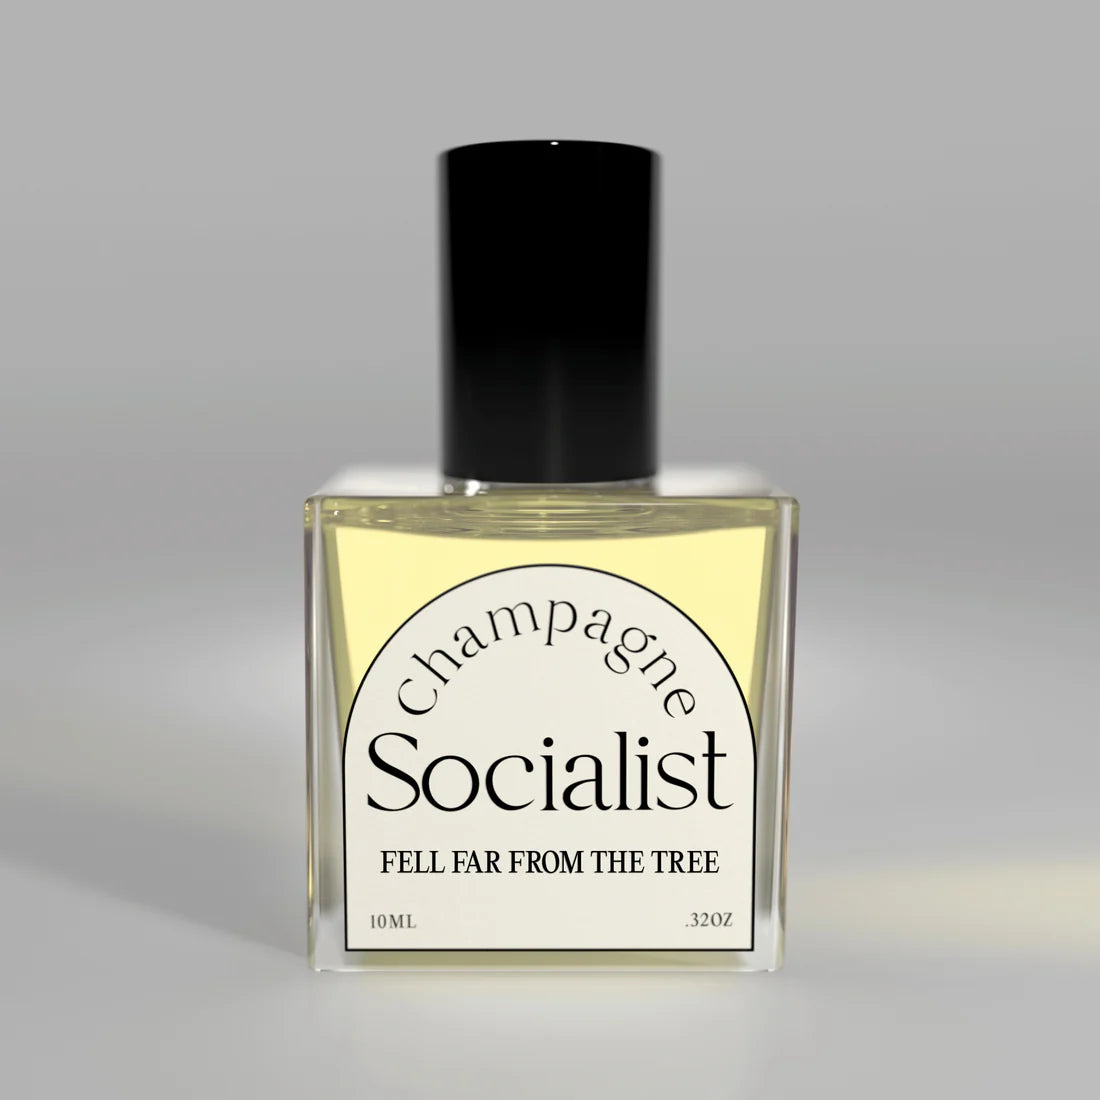 Champagne Socialist Fell Far From The Tree Perfume Oil